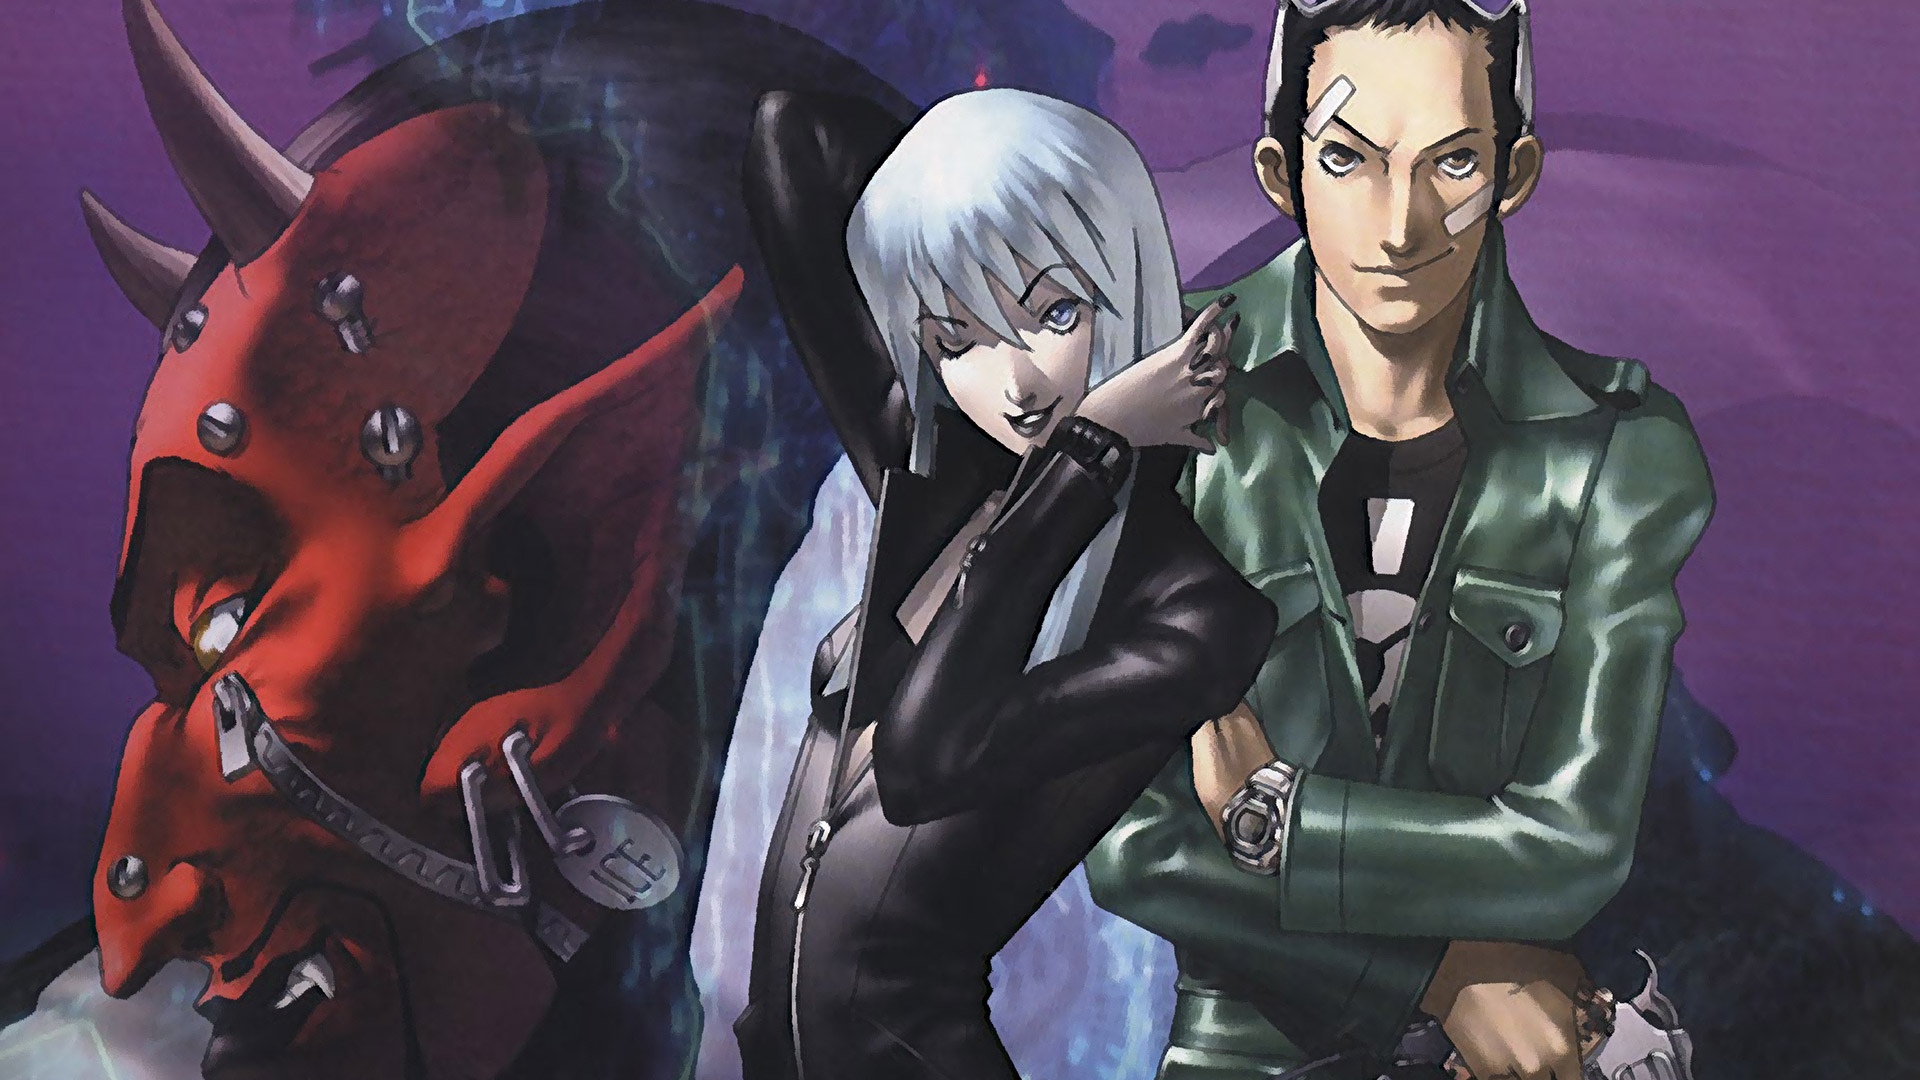 Soul Hackers 2 Complete Strategy Guide Announced for Release in